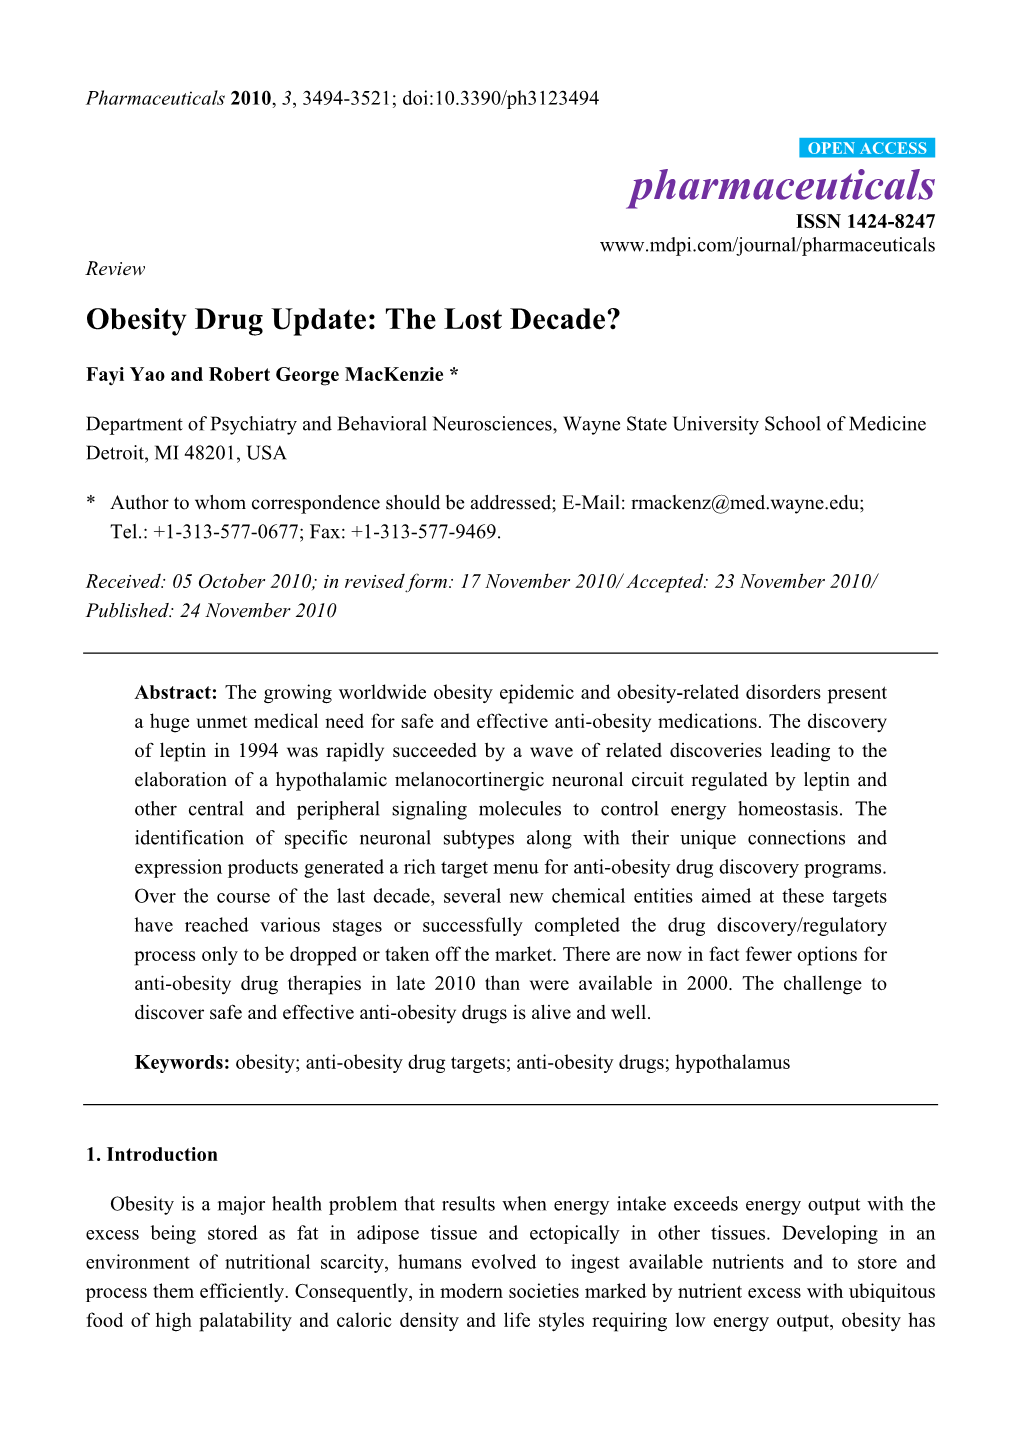 Obesity Drug Update: the Lost Decade?